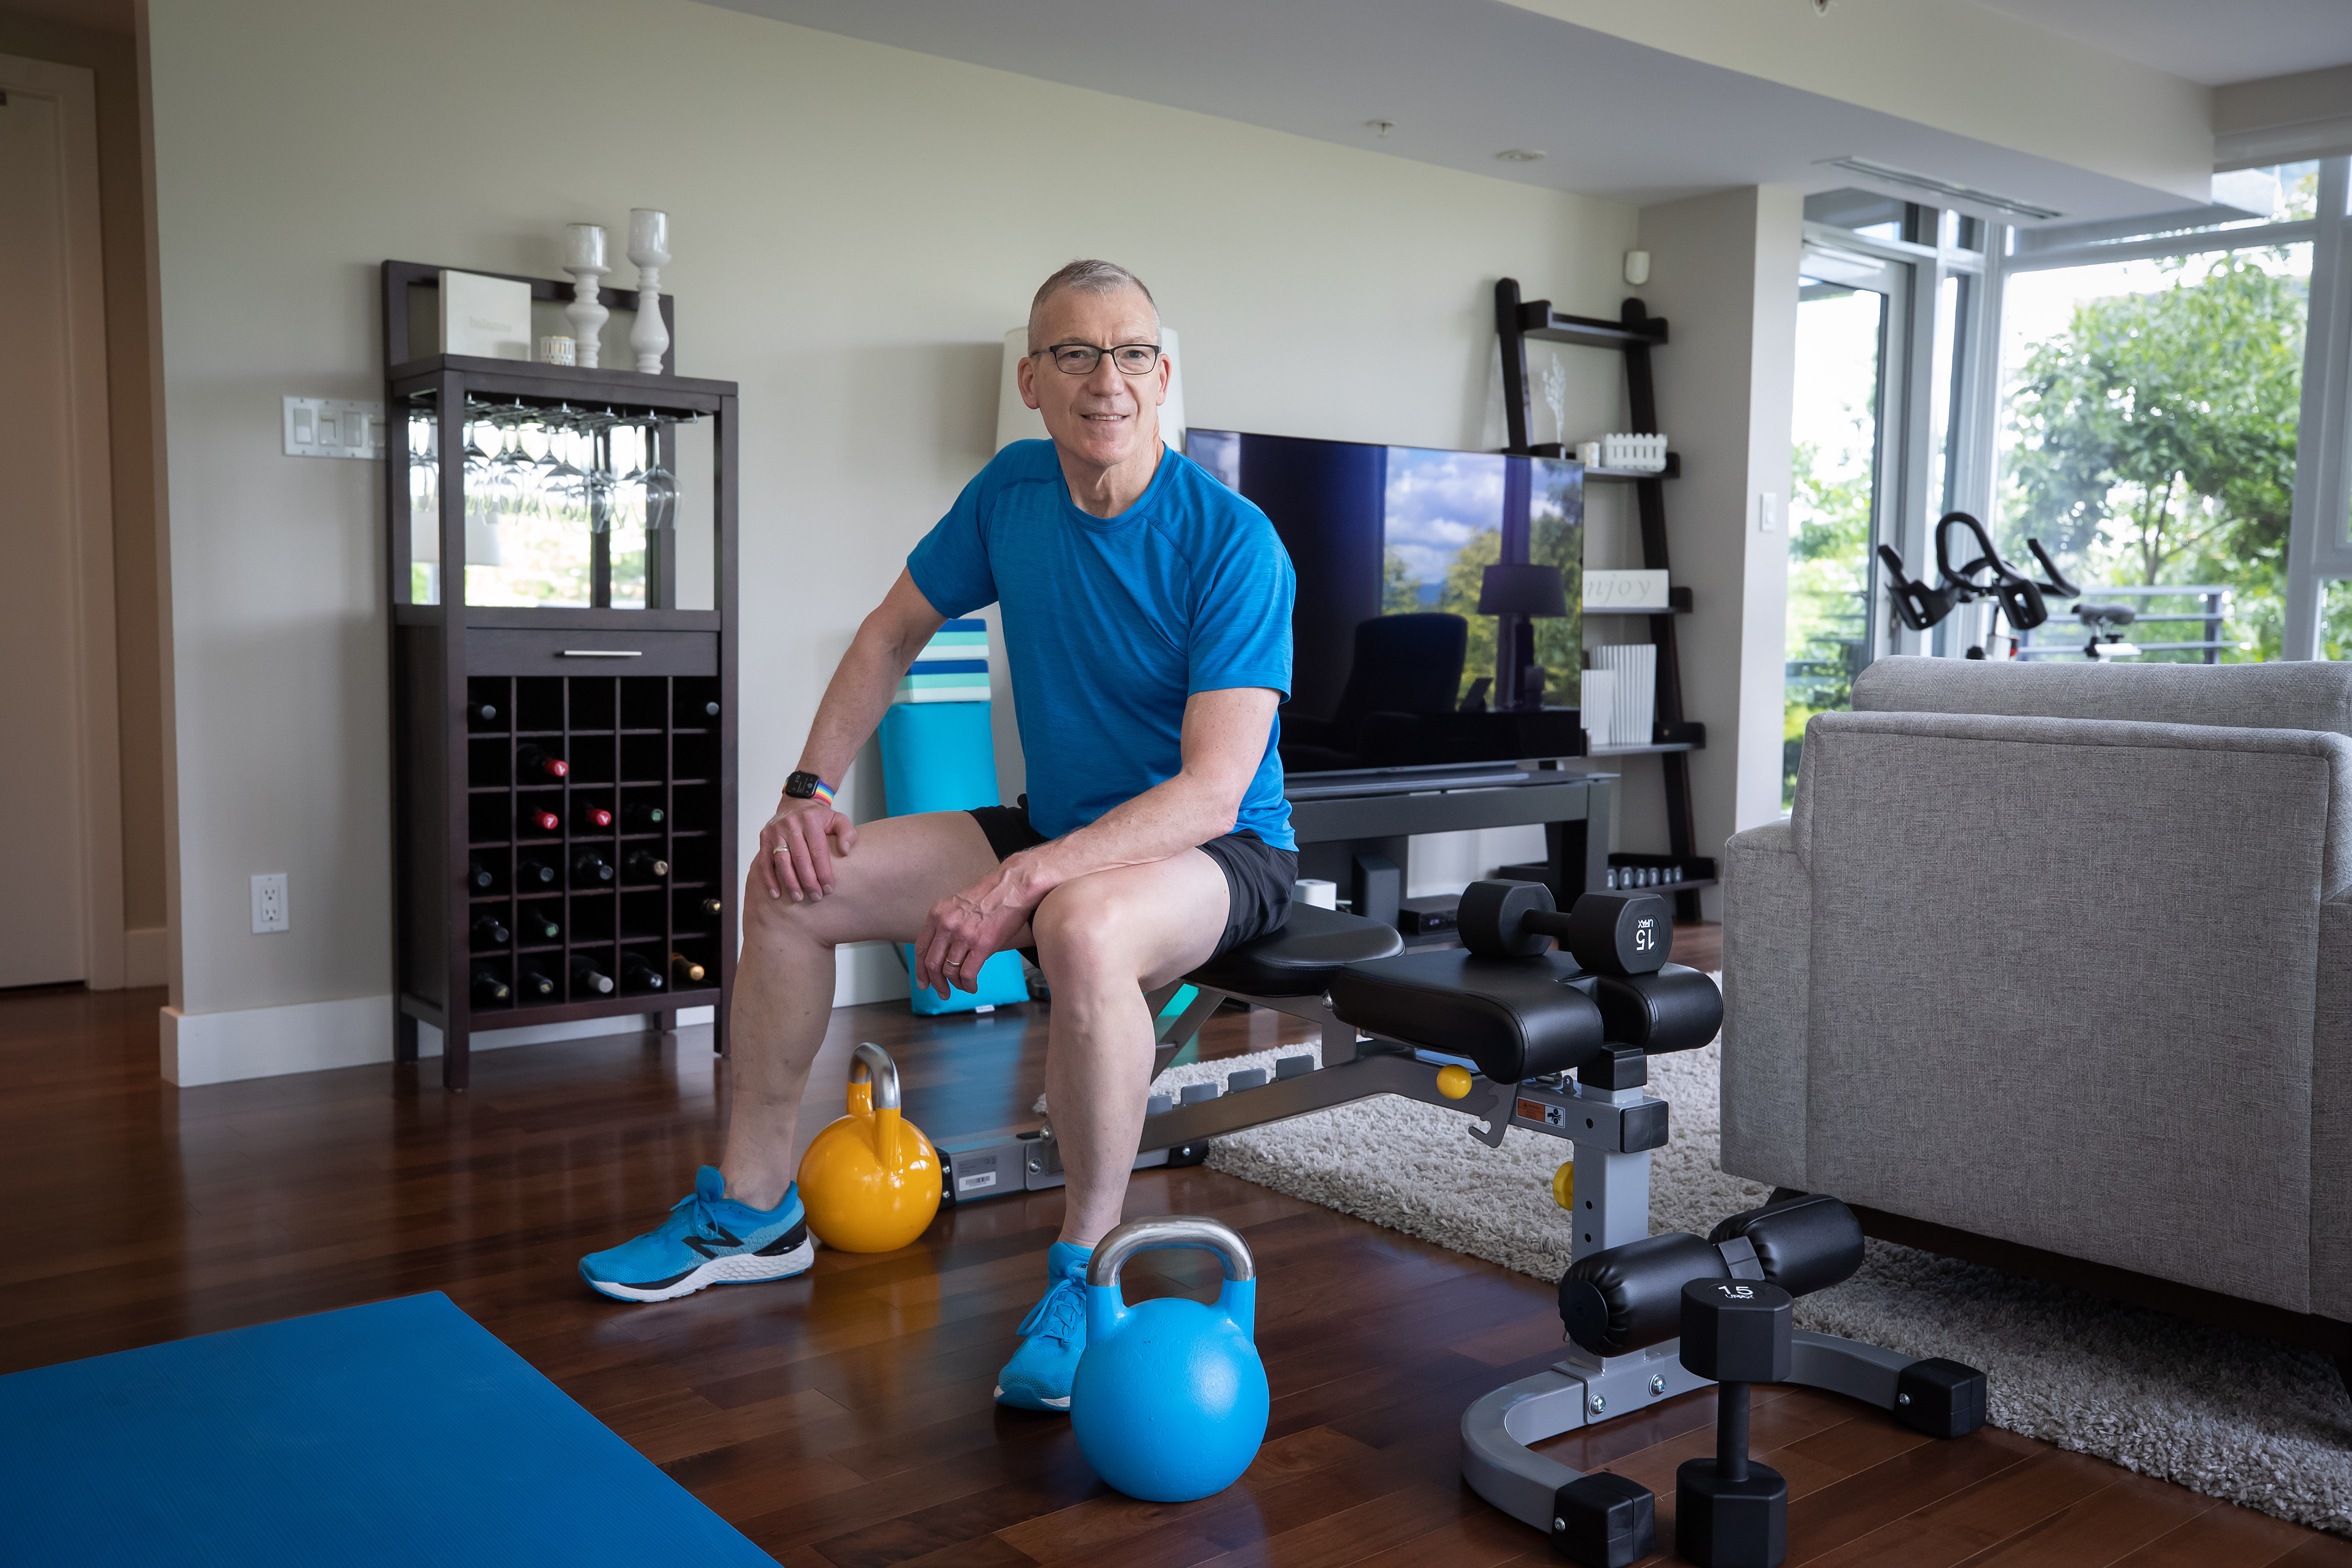 How to bulk up your home gym - The Globe and Mail